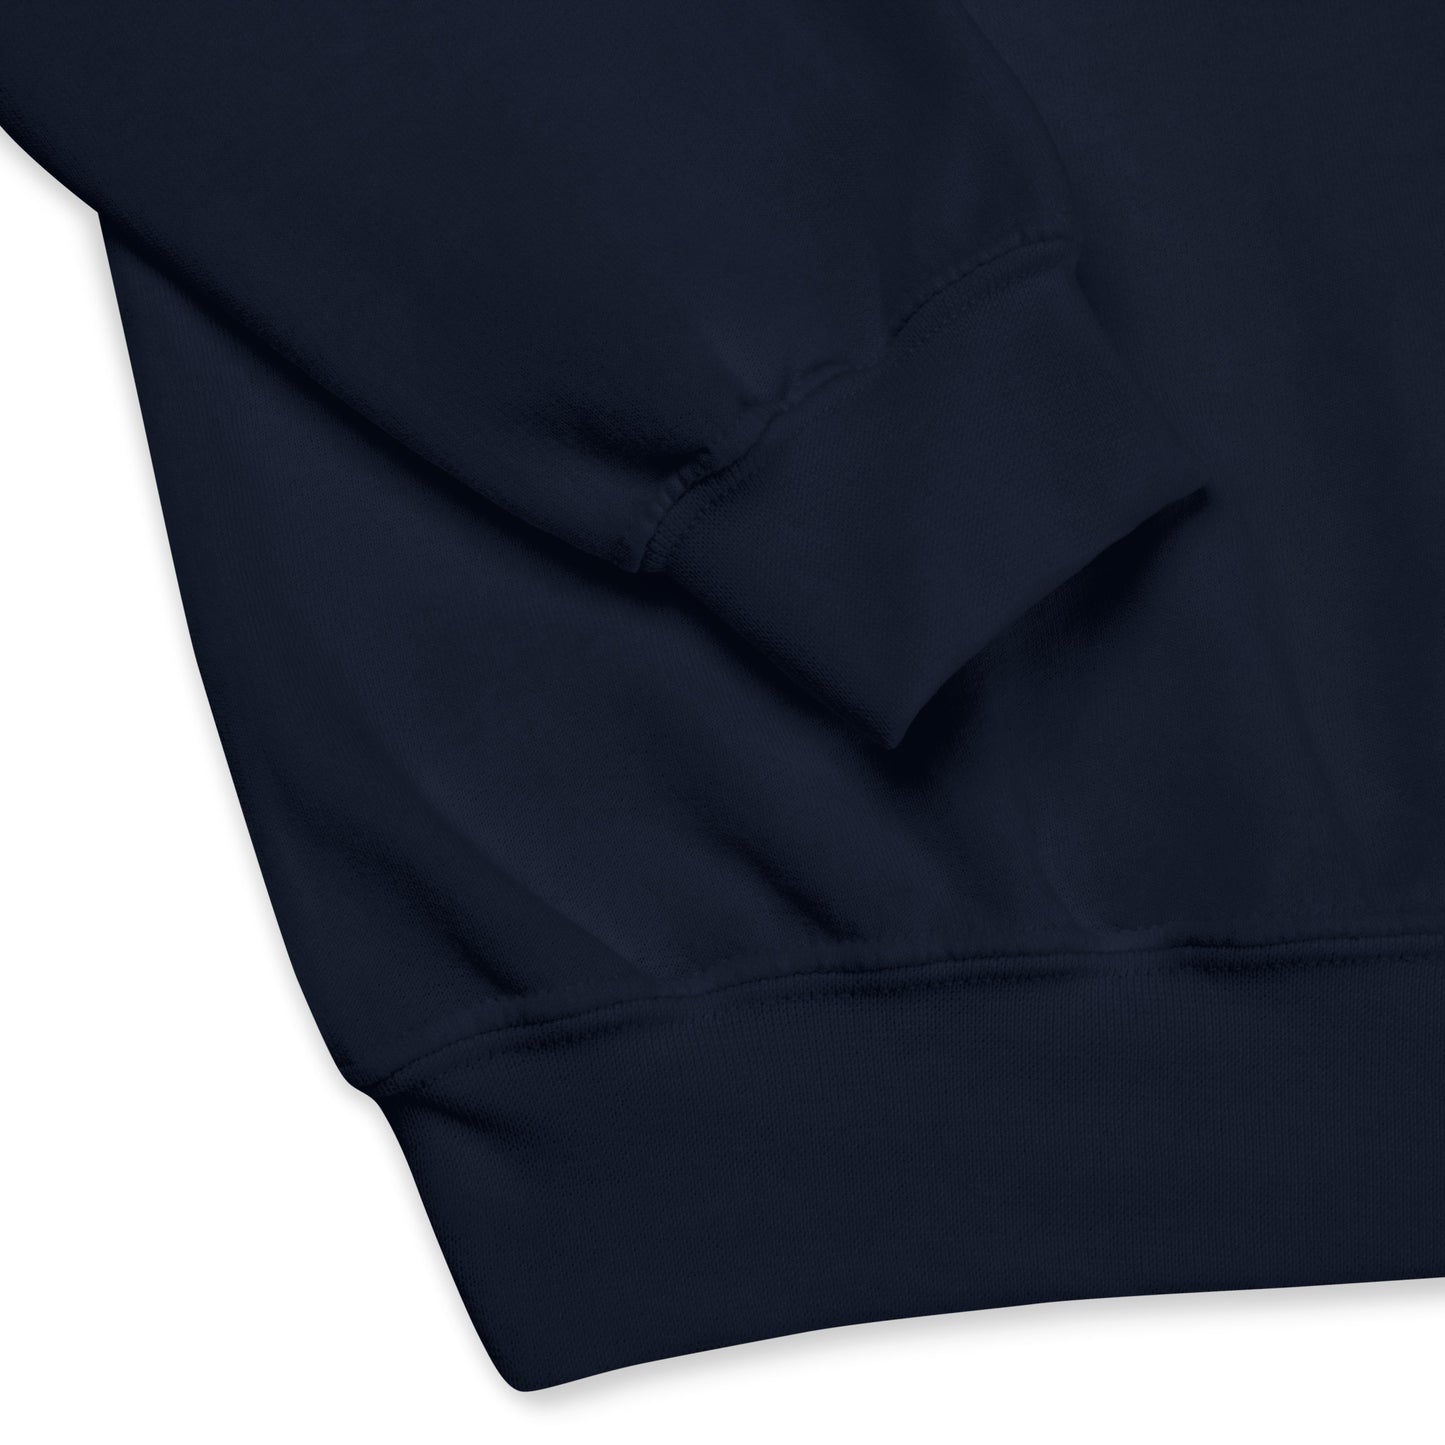 A54 Embroidered Crewneck in Navy